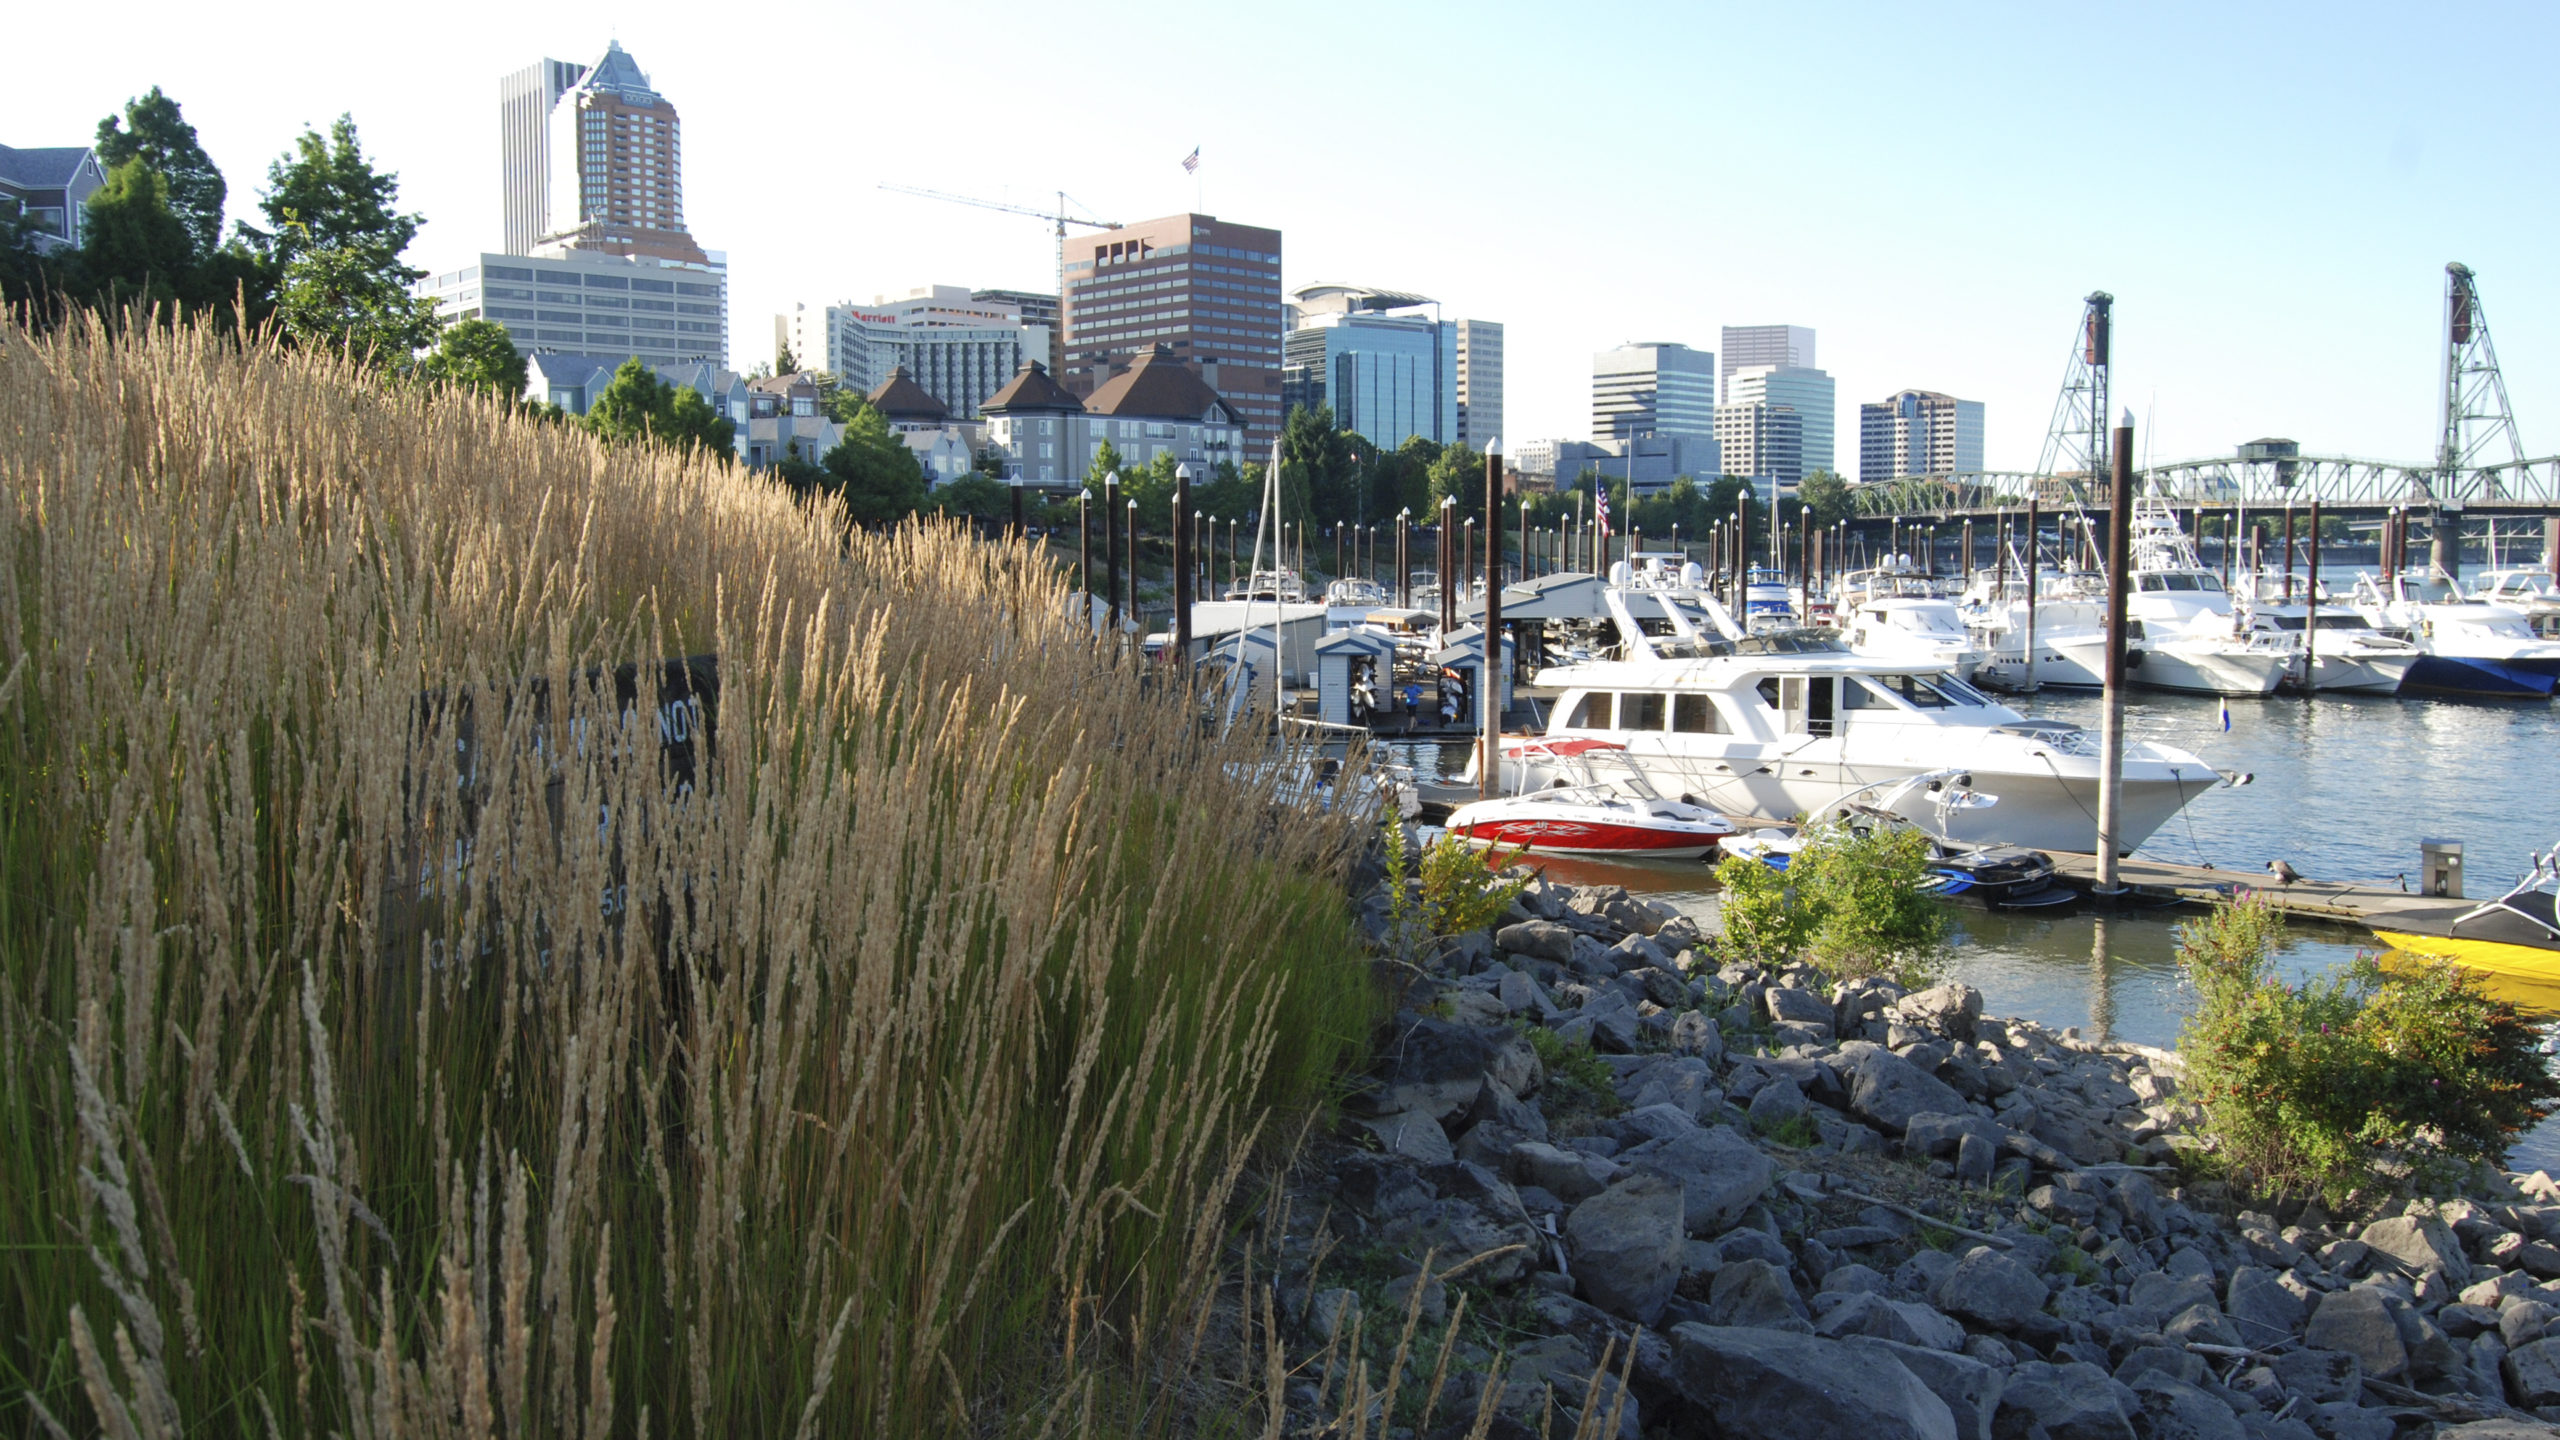 South Waterfront Park | Image 5/10